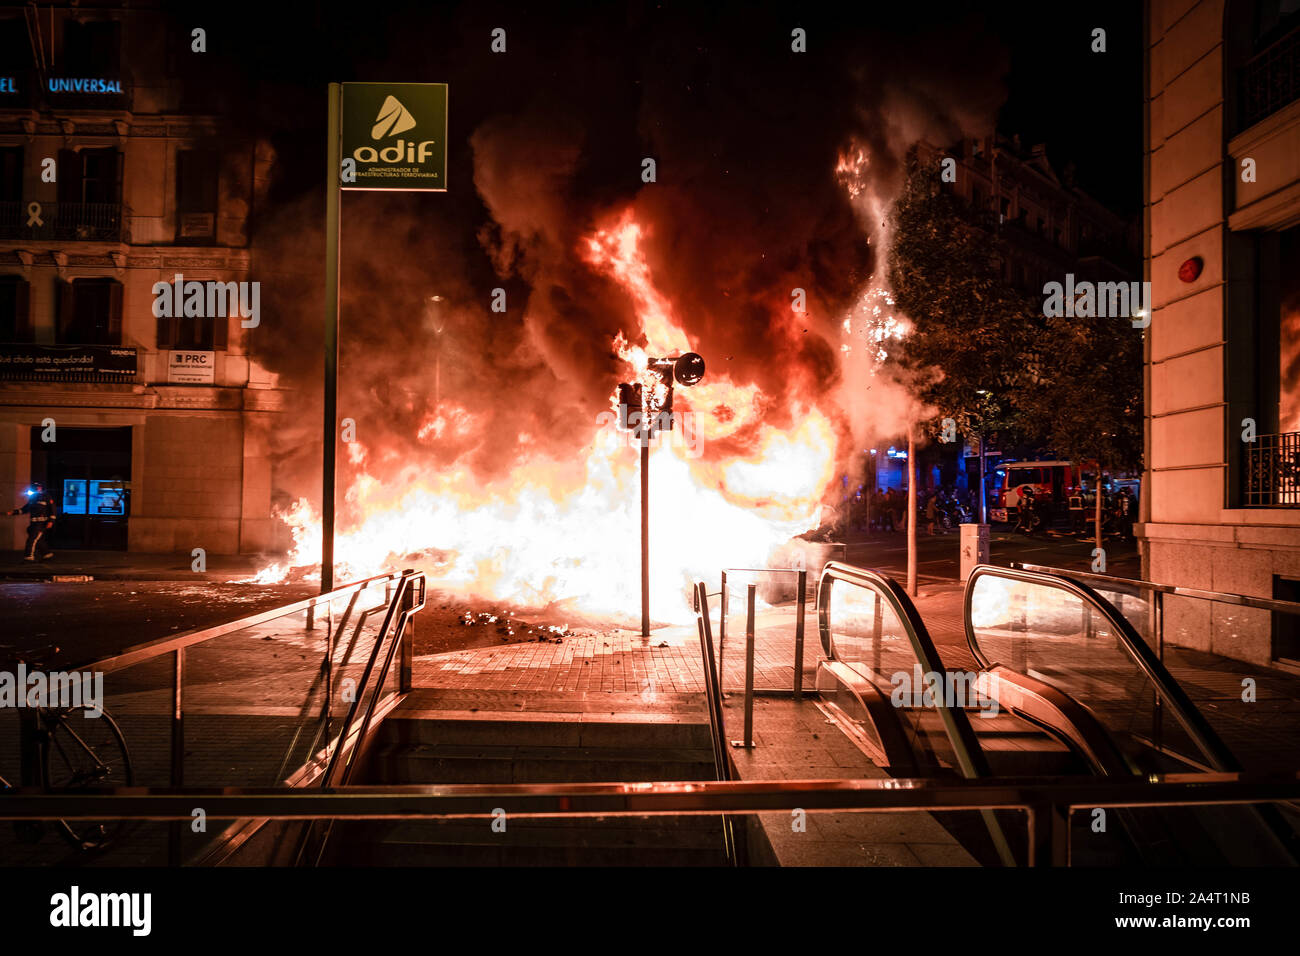 Barcelona, Spain. 15th Oct, 2019. A barricade burns violently after the intervention of the police units during the demonstration. Second day of independence protests after the judgments of the Supreme Court. Thousands of people concentrated in Barcelona near the headquarters of the Spanish Government Delegation in Catalonia. The protests were actually peaceful convocation but ended with heavy police charges and barricades on fire. Credit: SOPA Images Limited/Alamy Live News Stock Photo